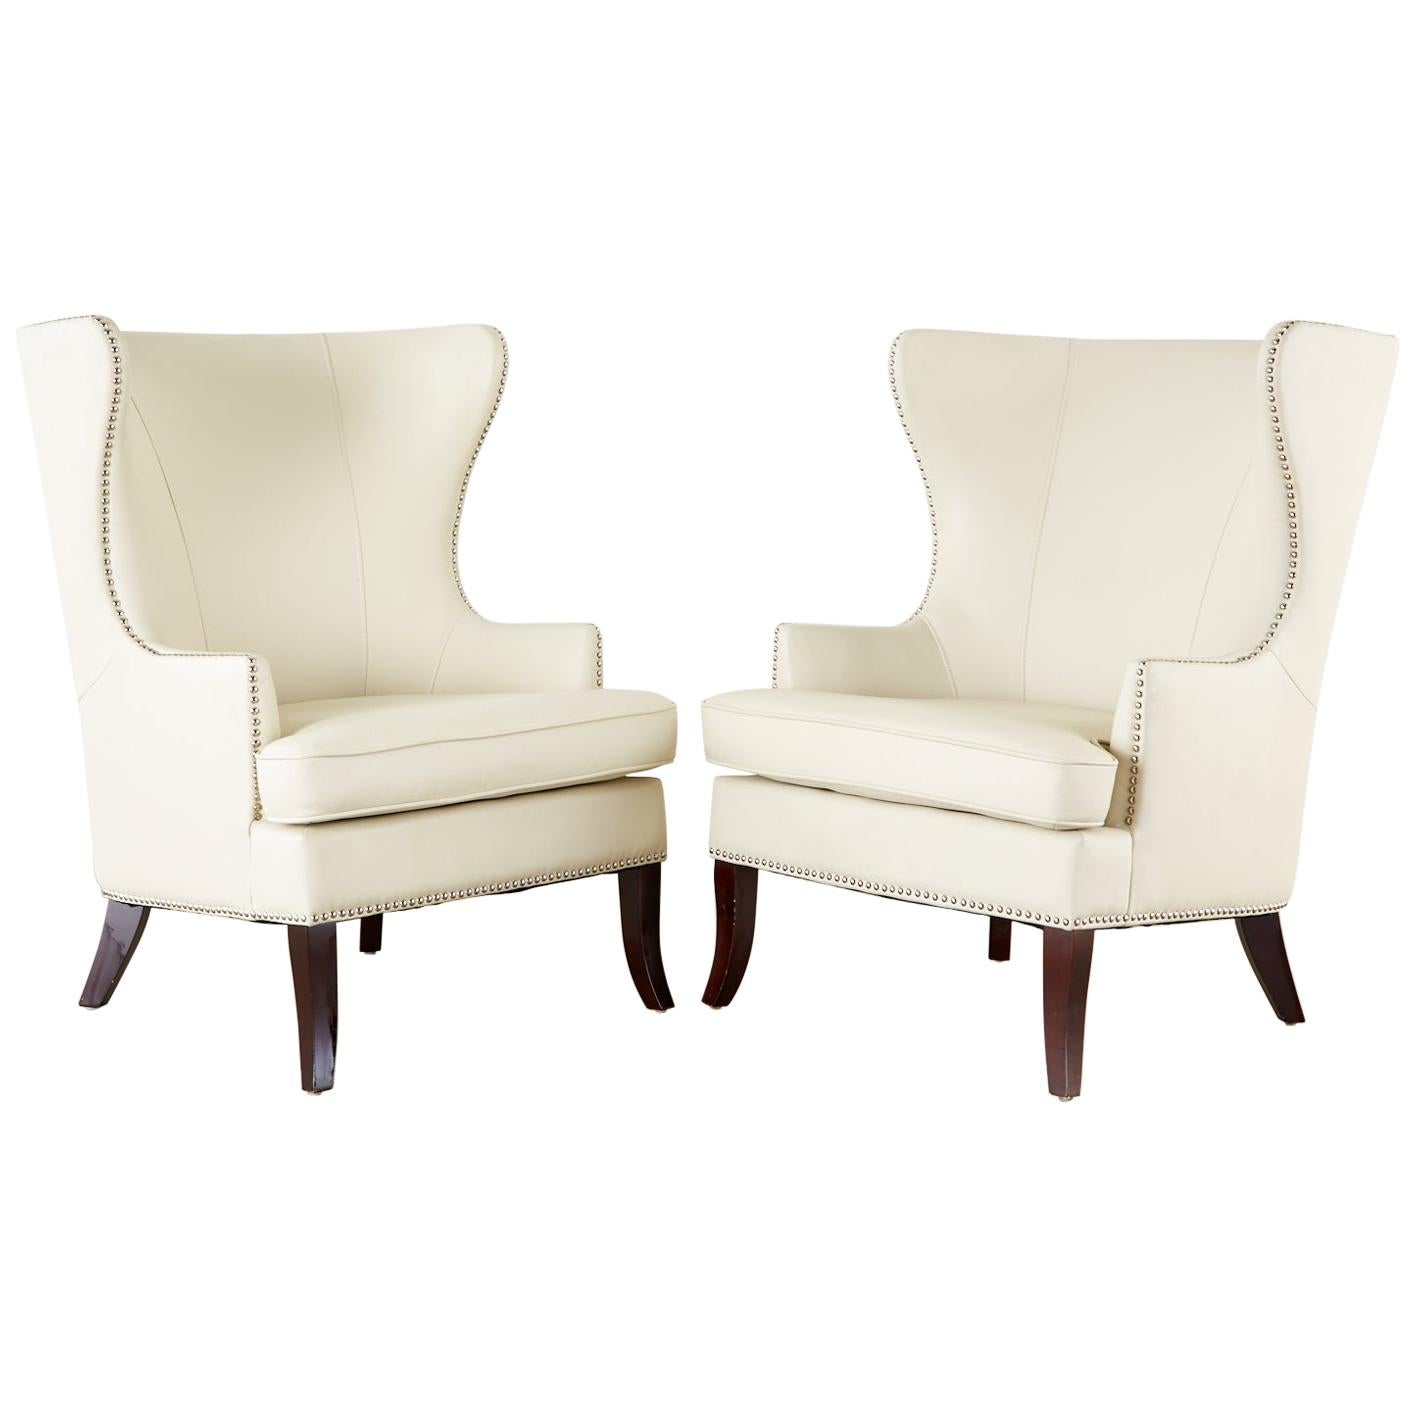 Pair of Modern White Wingback Lounge Chairs